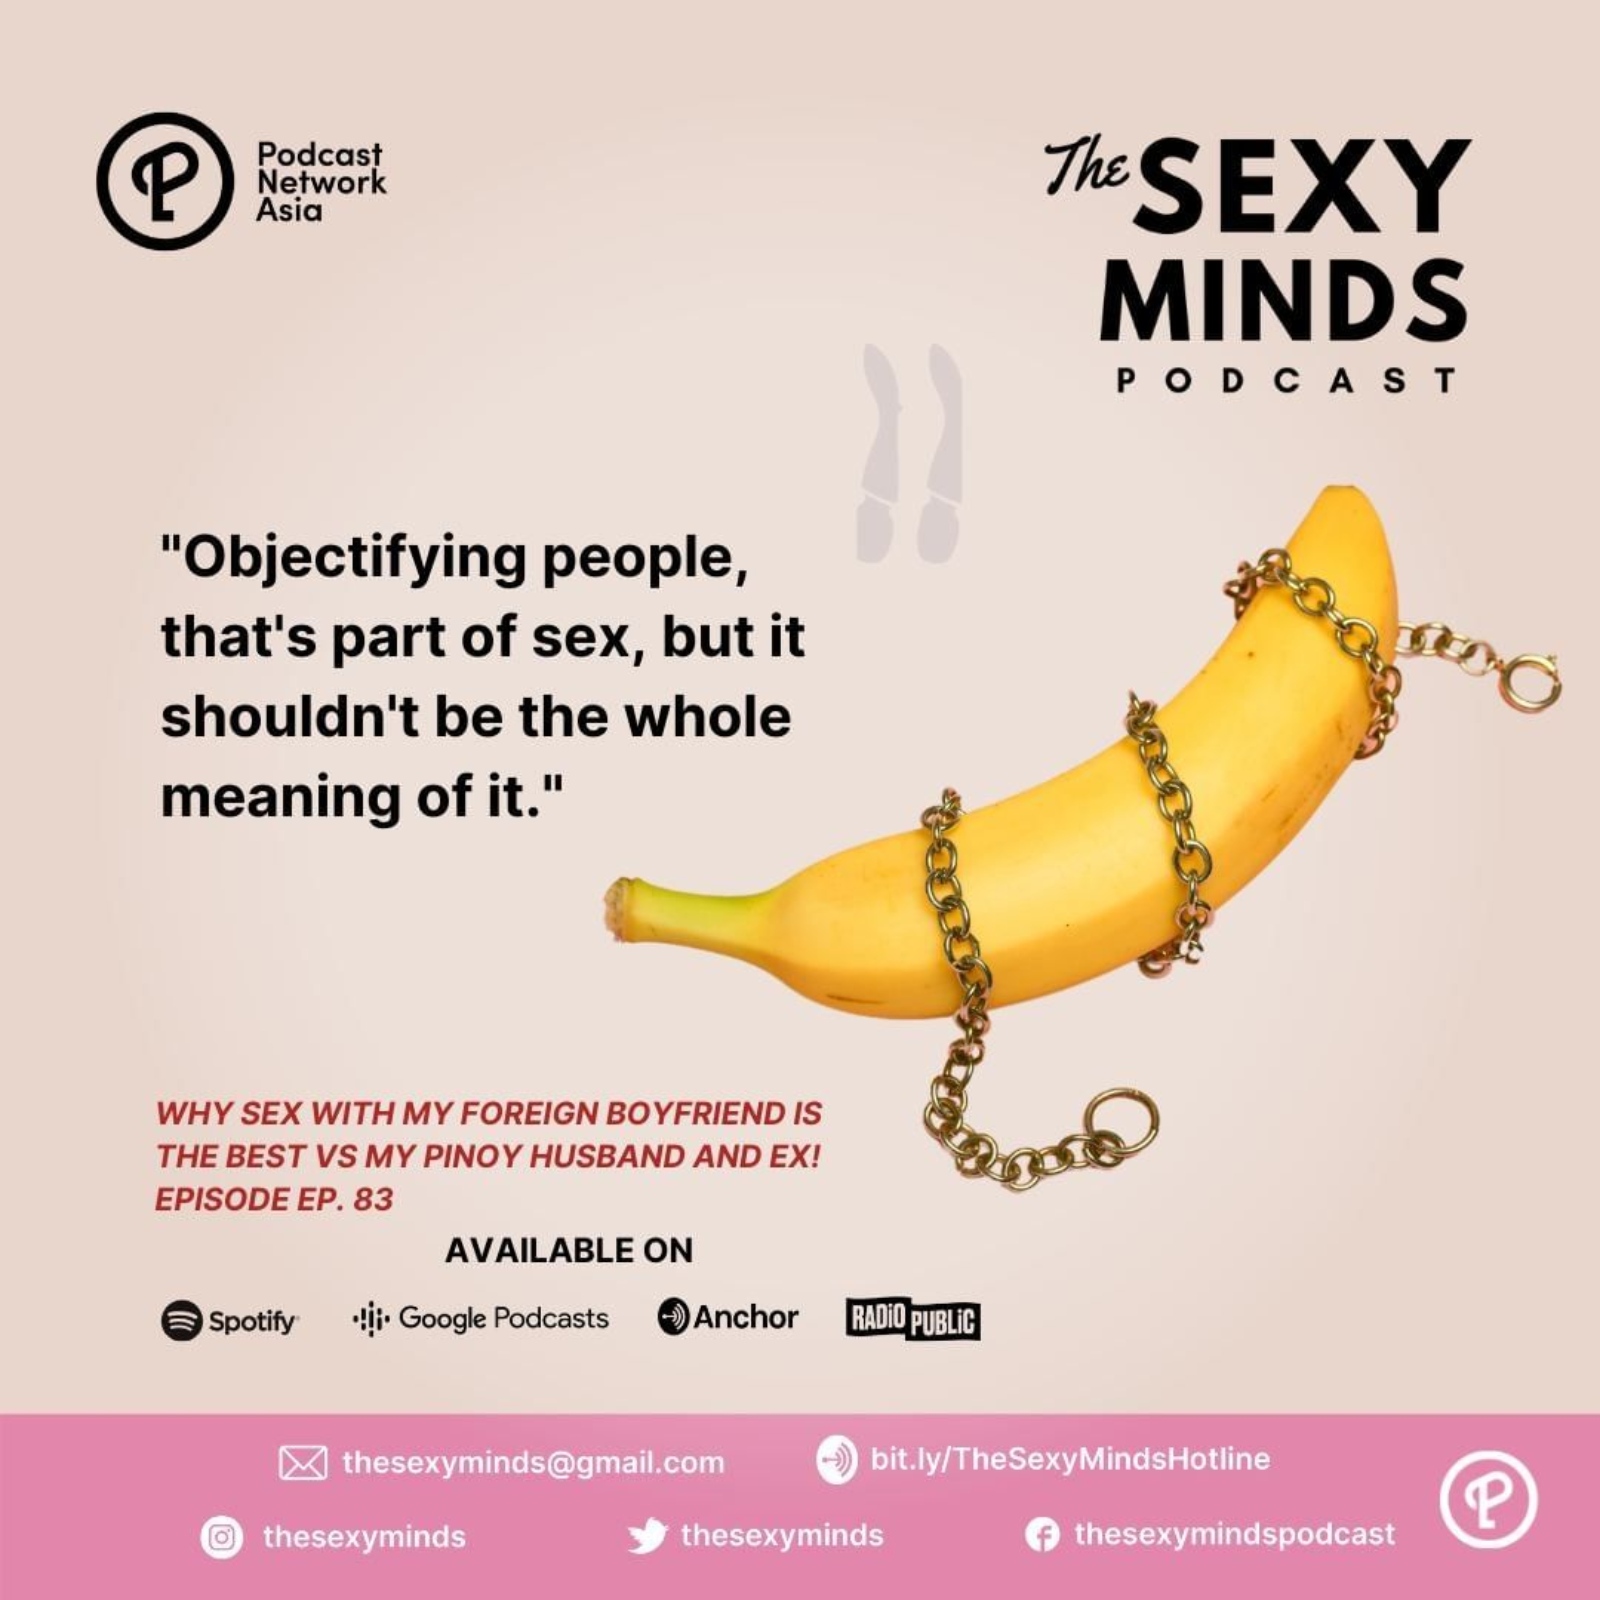 The Sexy Minds Podcast